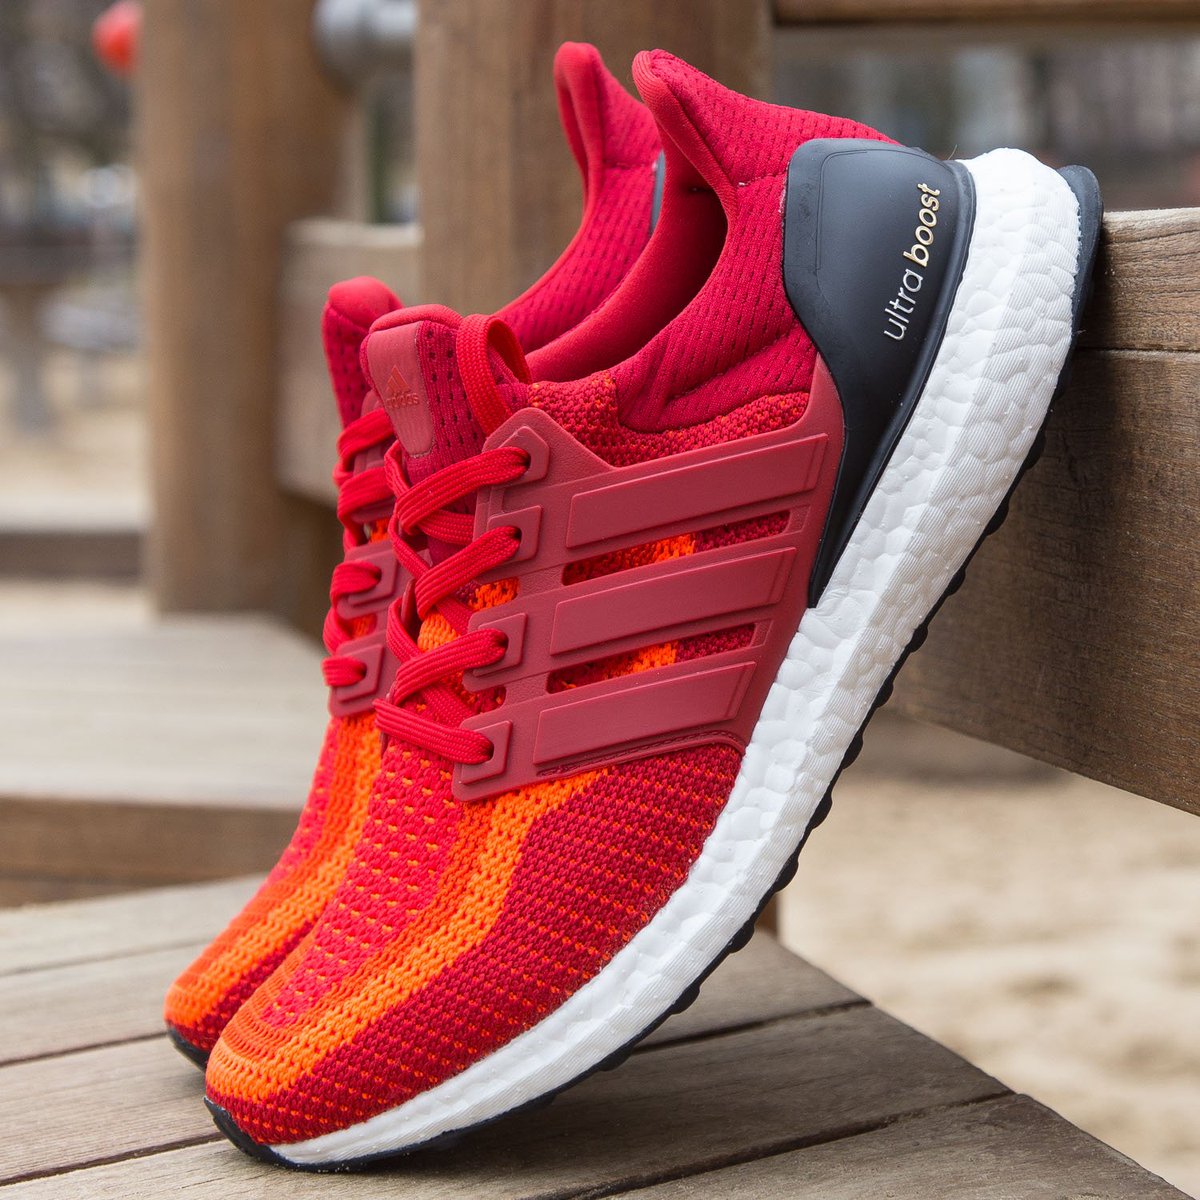 adidas ultra boost 2.0 red gradient